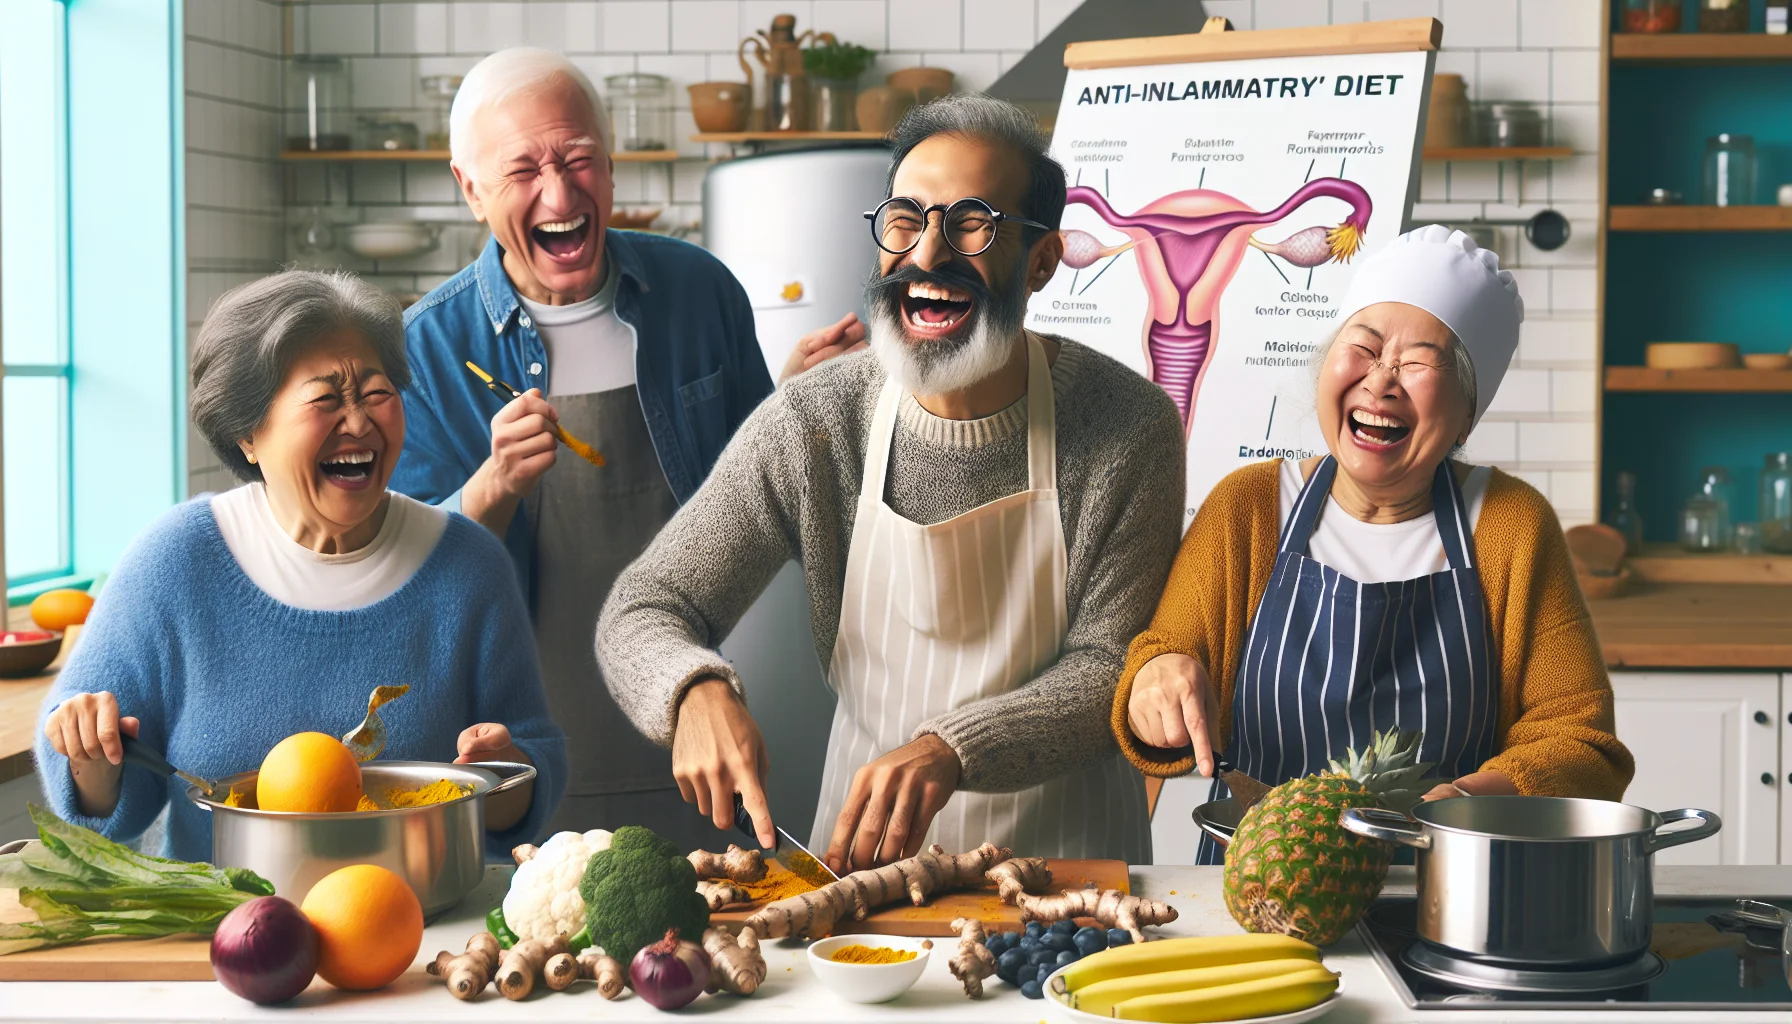 Let's depict a lighthearted, realistic scene of a senior citizen group in the middle of an 'anti-inflammatory diet' cooking class. The class is taking place in a bright, well-stocked kitchen. You have a Middle-Eastern elderly woman laughing as she peels a turmeric root, a Caucasian elderly gentleman wearing glasses is hilariously struggling to chop a pineapple, and a Black elderly woman is grinning while stirring a large pot of colorfully assorted vegetables. A South Asian male nutritionist stands by, with a supportive smile, pointing at a chart illustrating endometriosis-friendly foods.